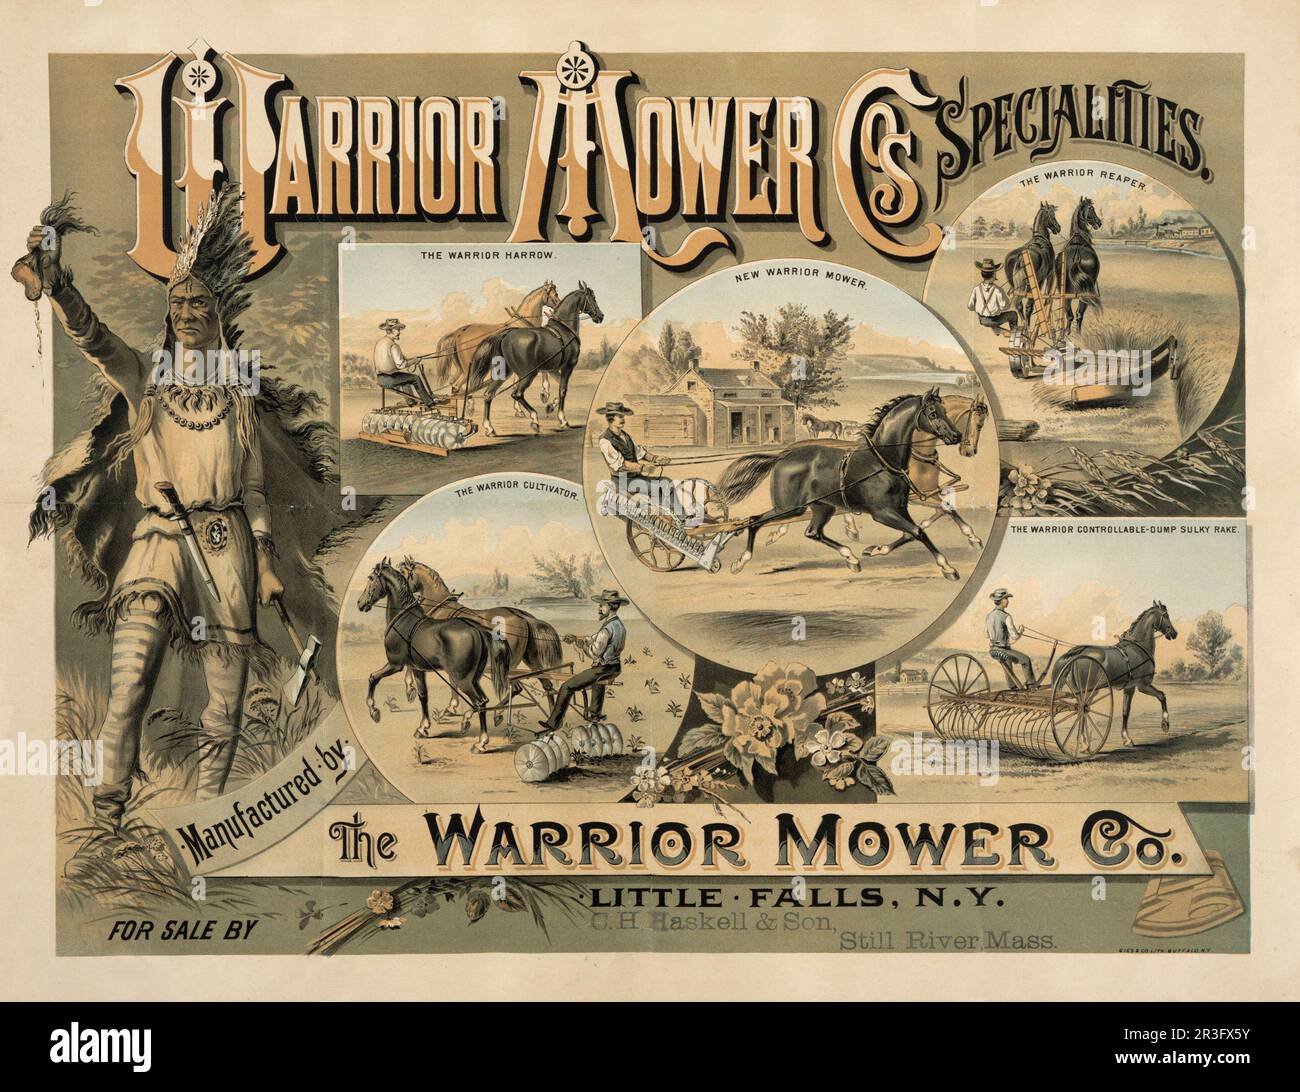 Vintage advertisement for agricultural machinery manufactured by the Warrior Mower Company. Stock Photo